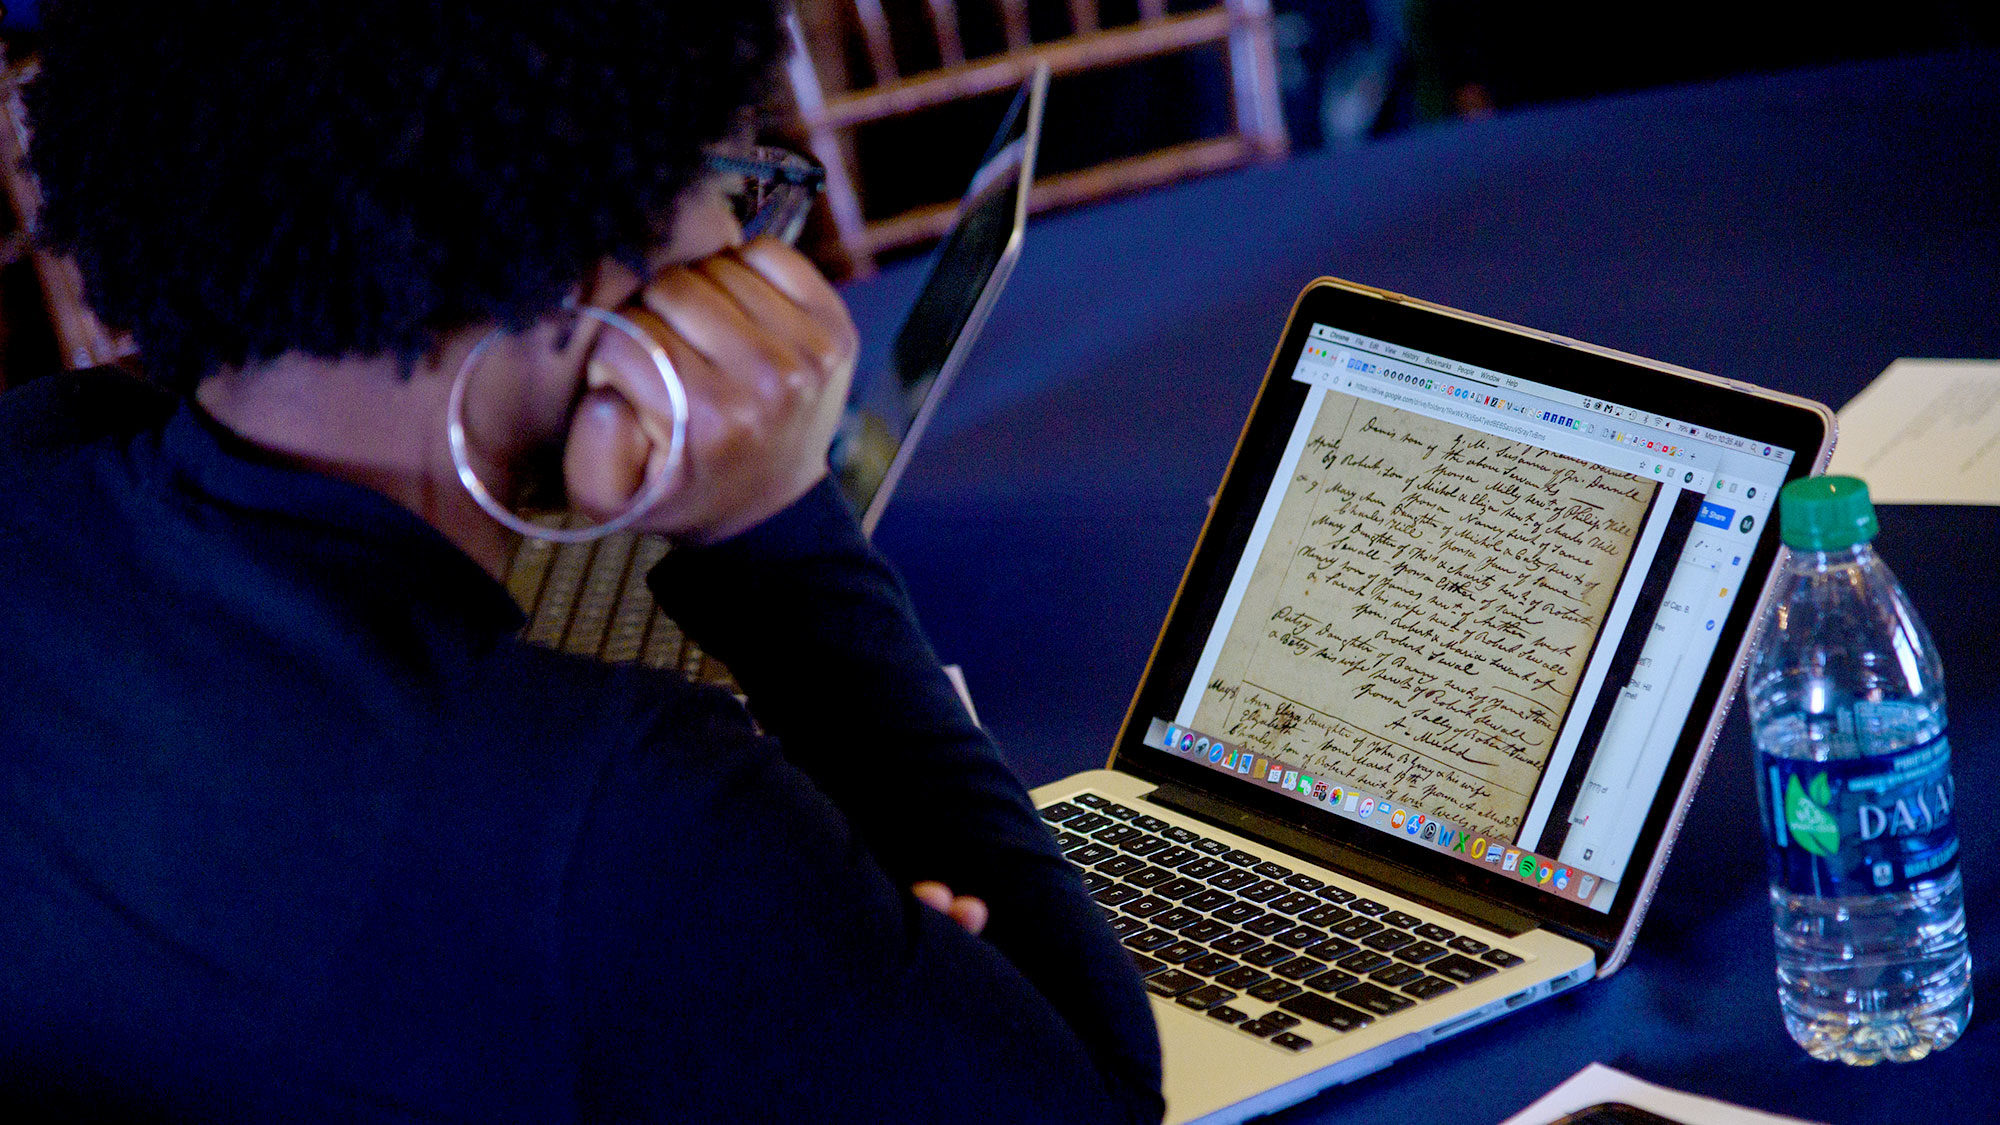 A woman looks at a historical document on her laptop computer.